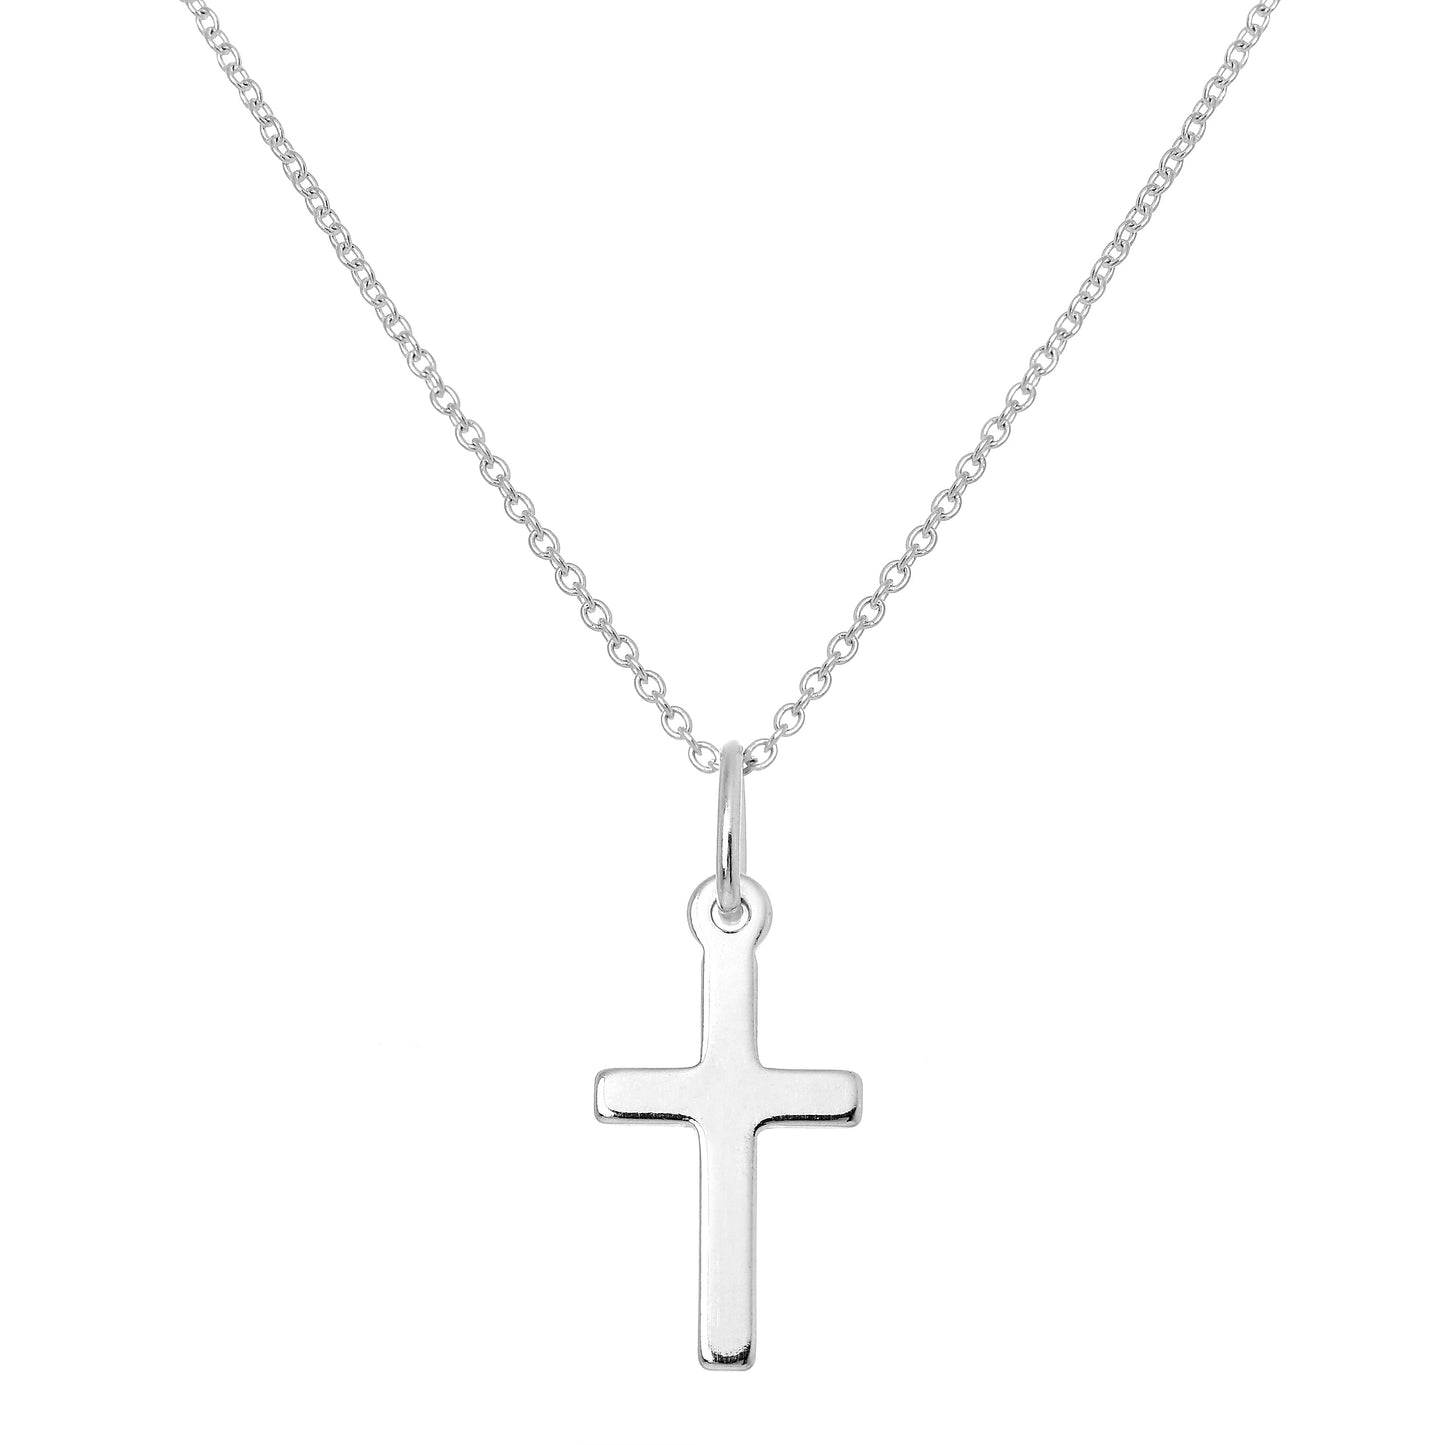 Sterling Silver Plain Cross Pendant Necklace 16 - 22 Inches